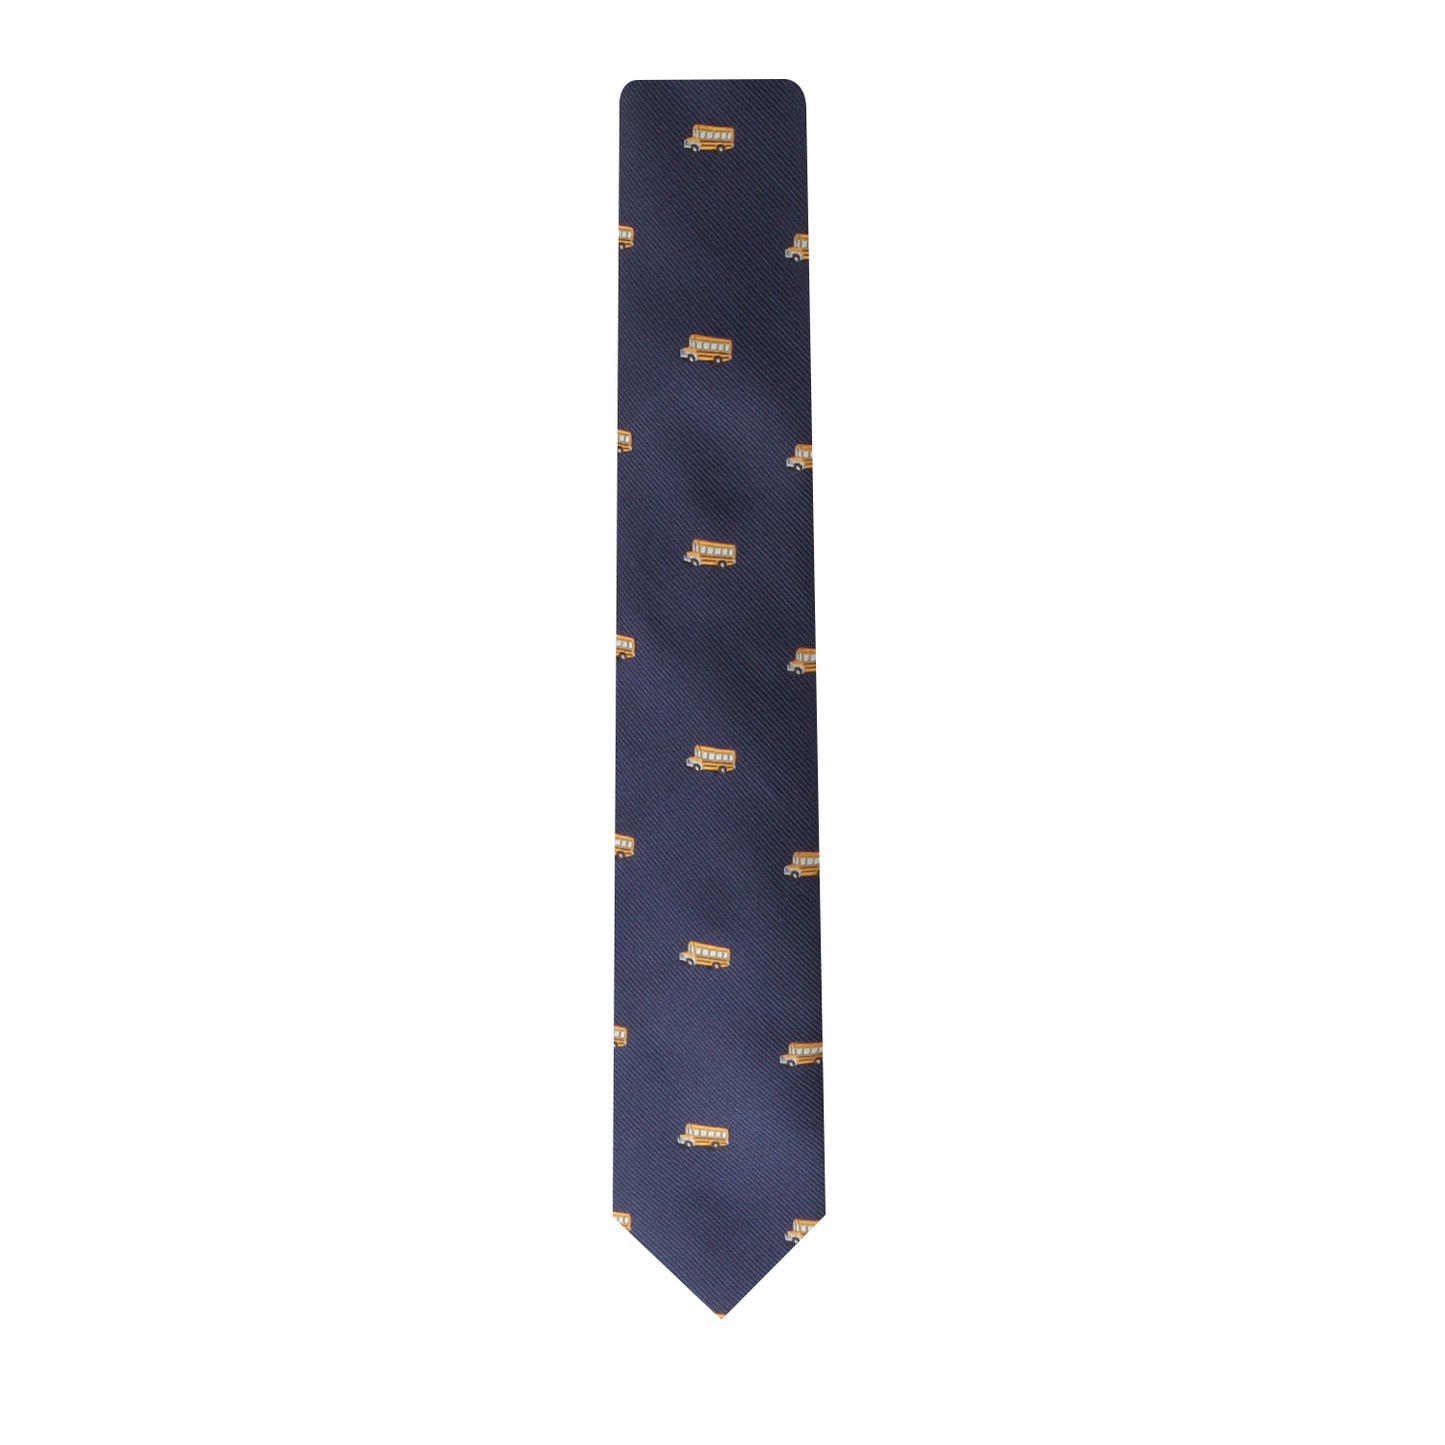 School Bus Skinny Tie featuring an allover pattern of small yellow crowns, displayed vertically on a plain background. This vintage tie showcases a charming and nostalgic touch.